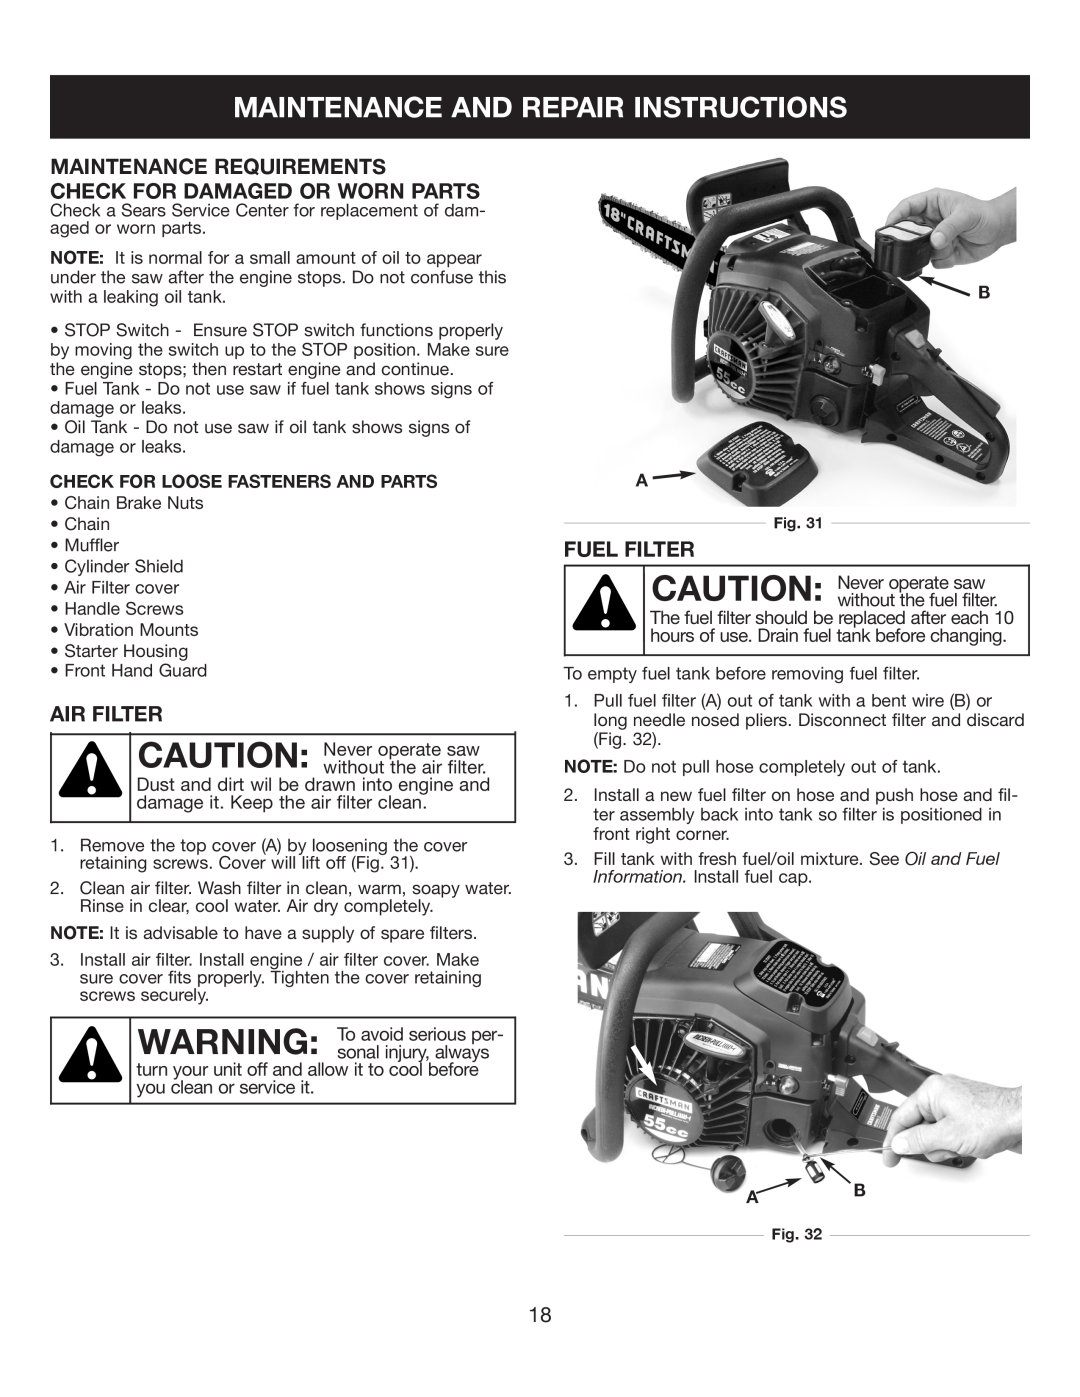 Sears 316.35084 Maintenance And Repair Instructions, Maintenance Requirements Check For Damaged Or Worn Parts, Air Filter 